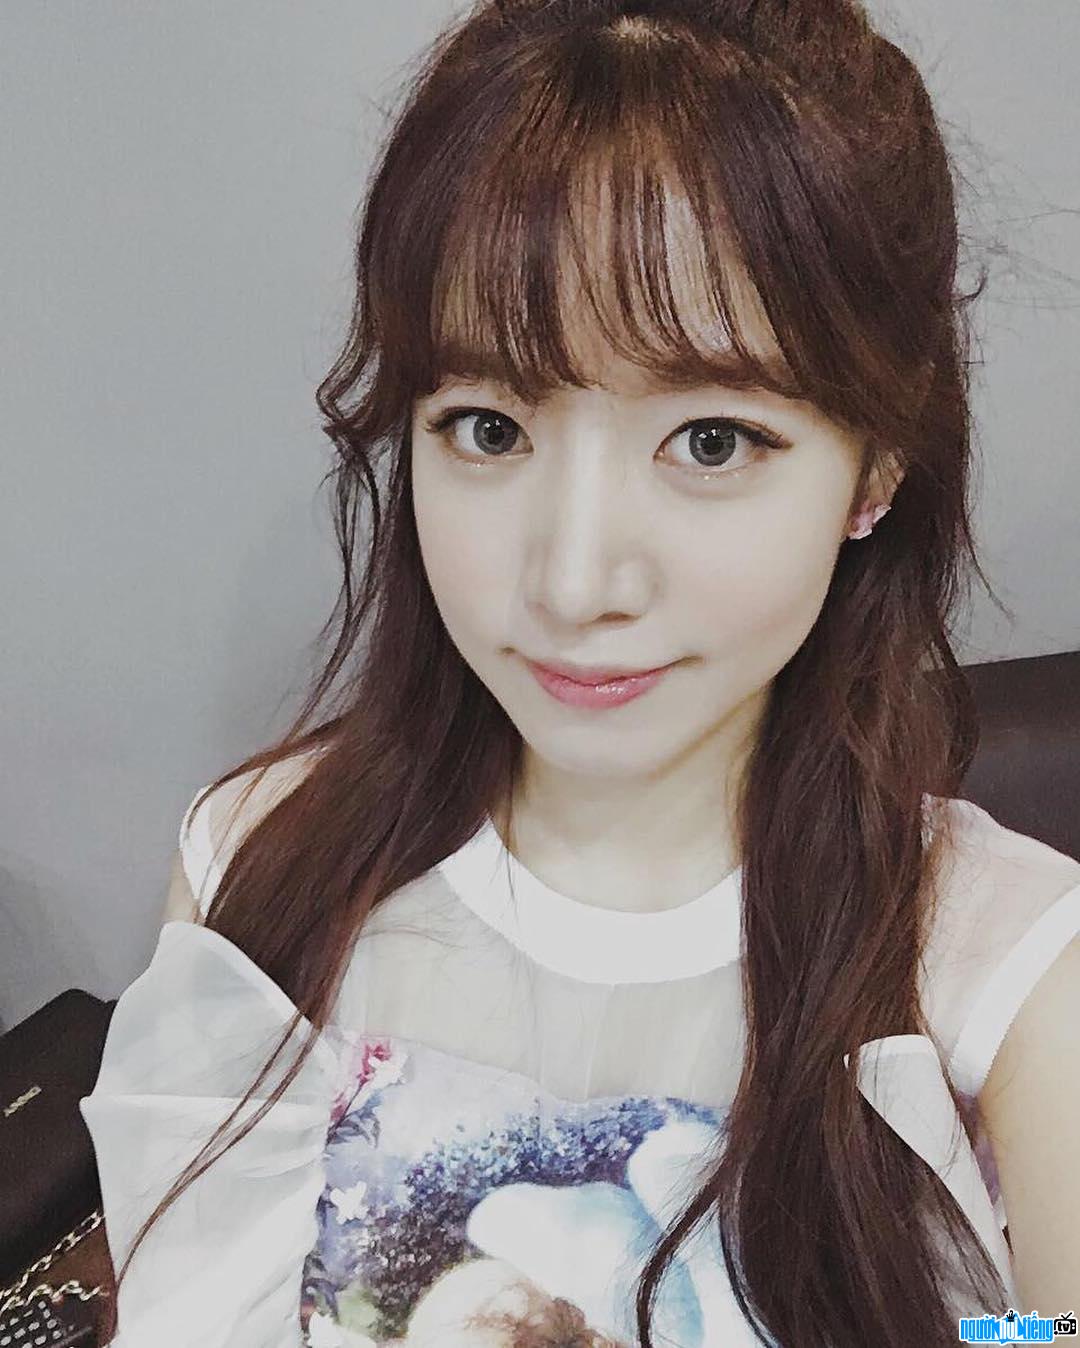 Kim Namjoo is a member of group A Pink